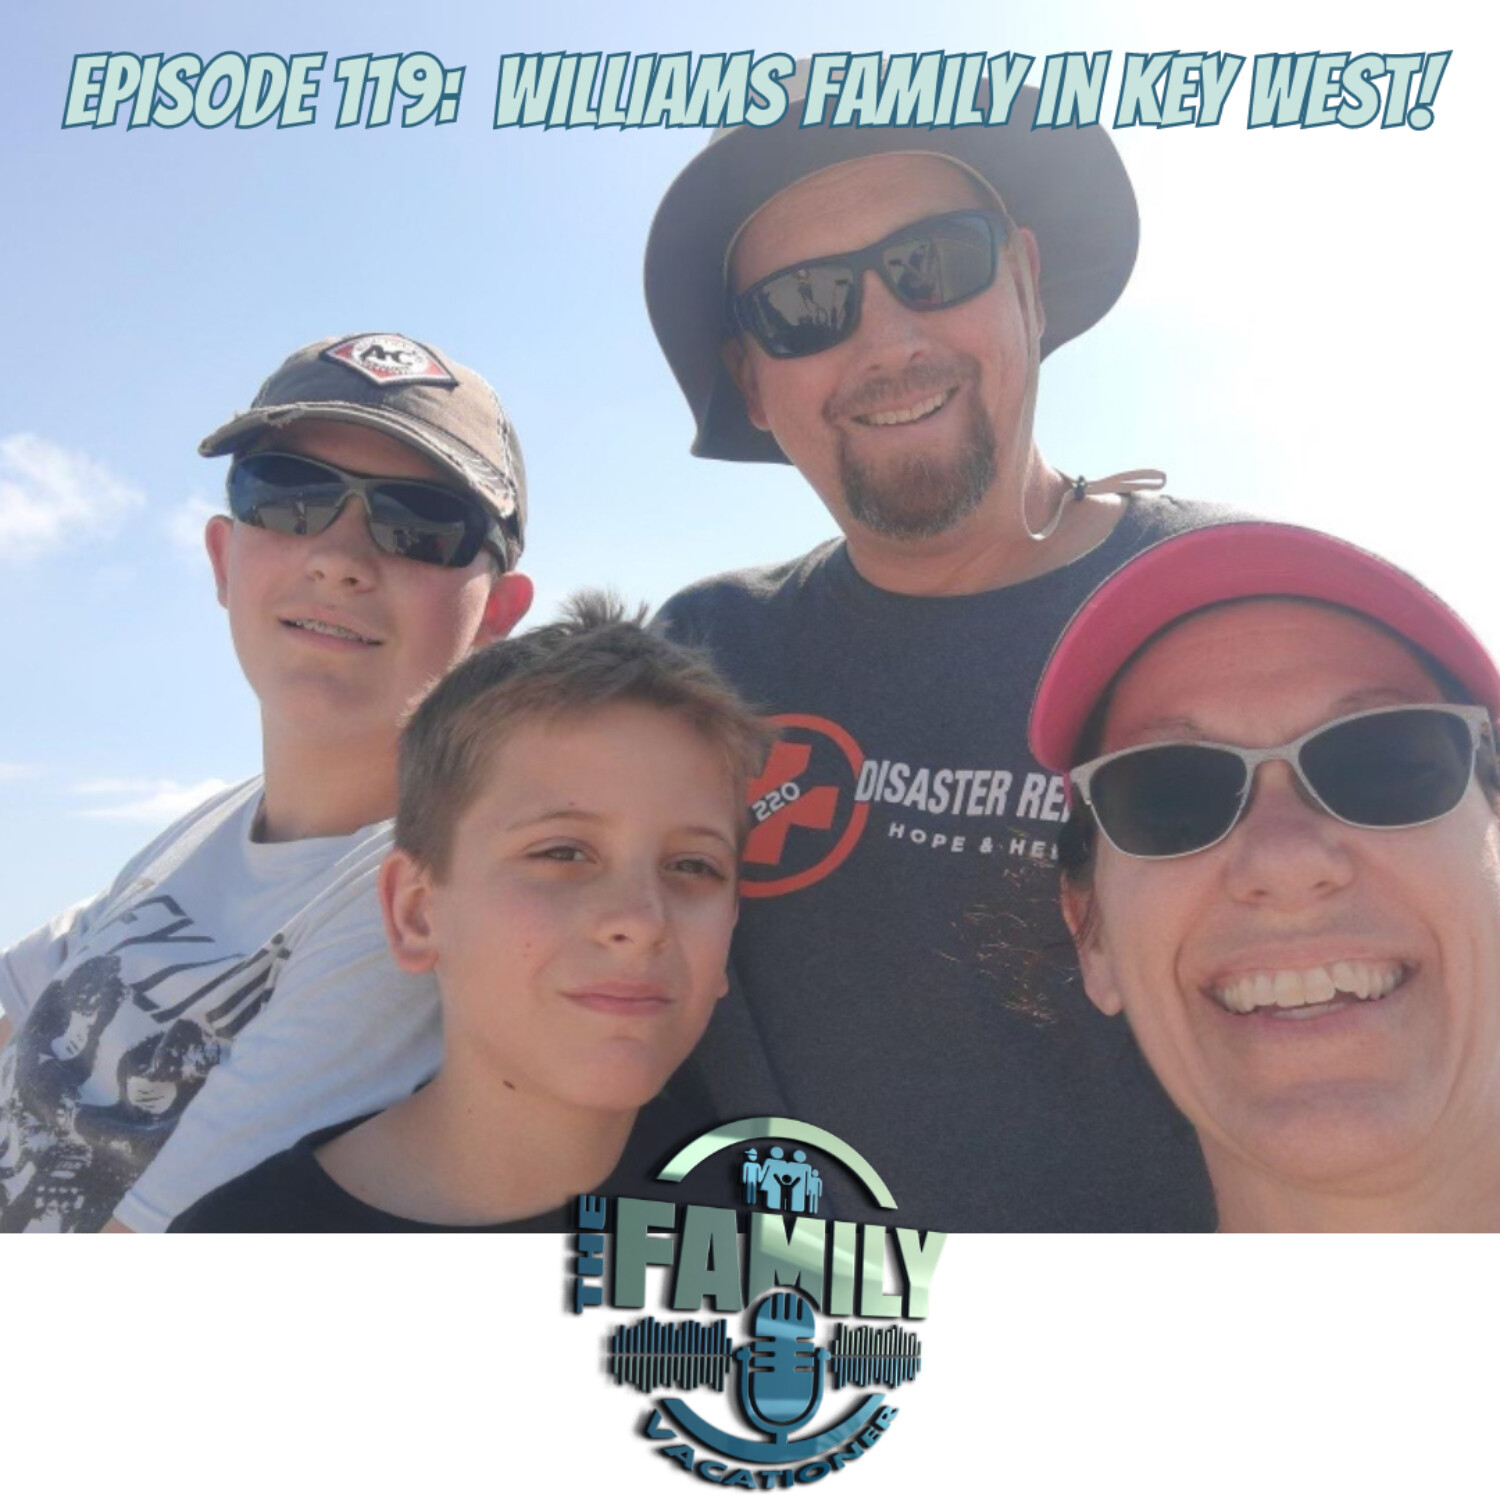 Williams Family in Key West